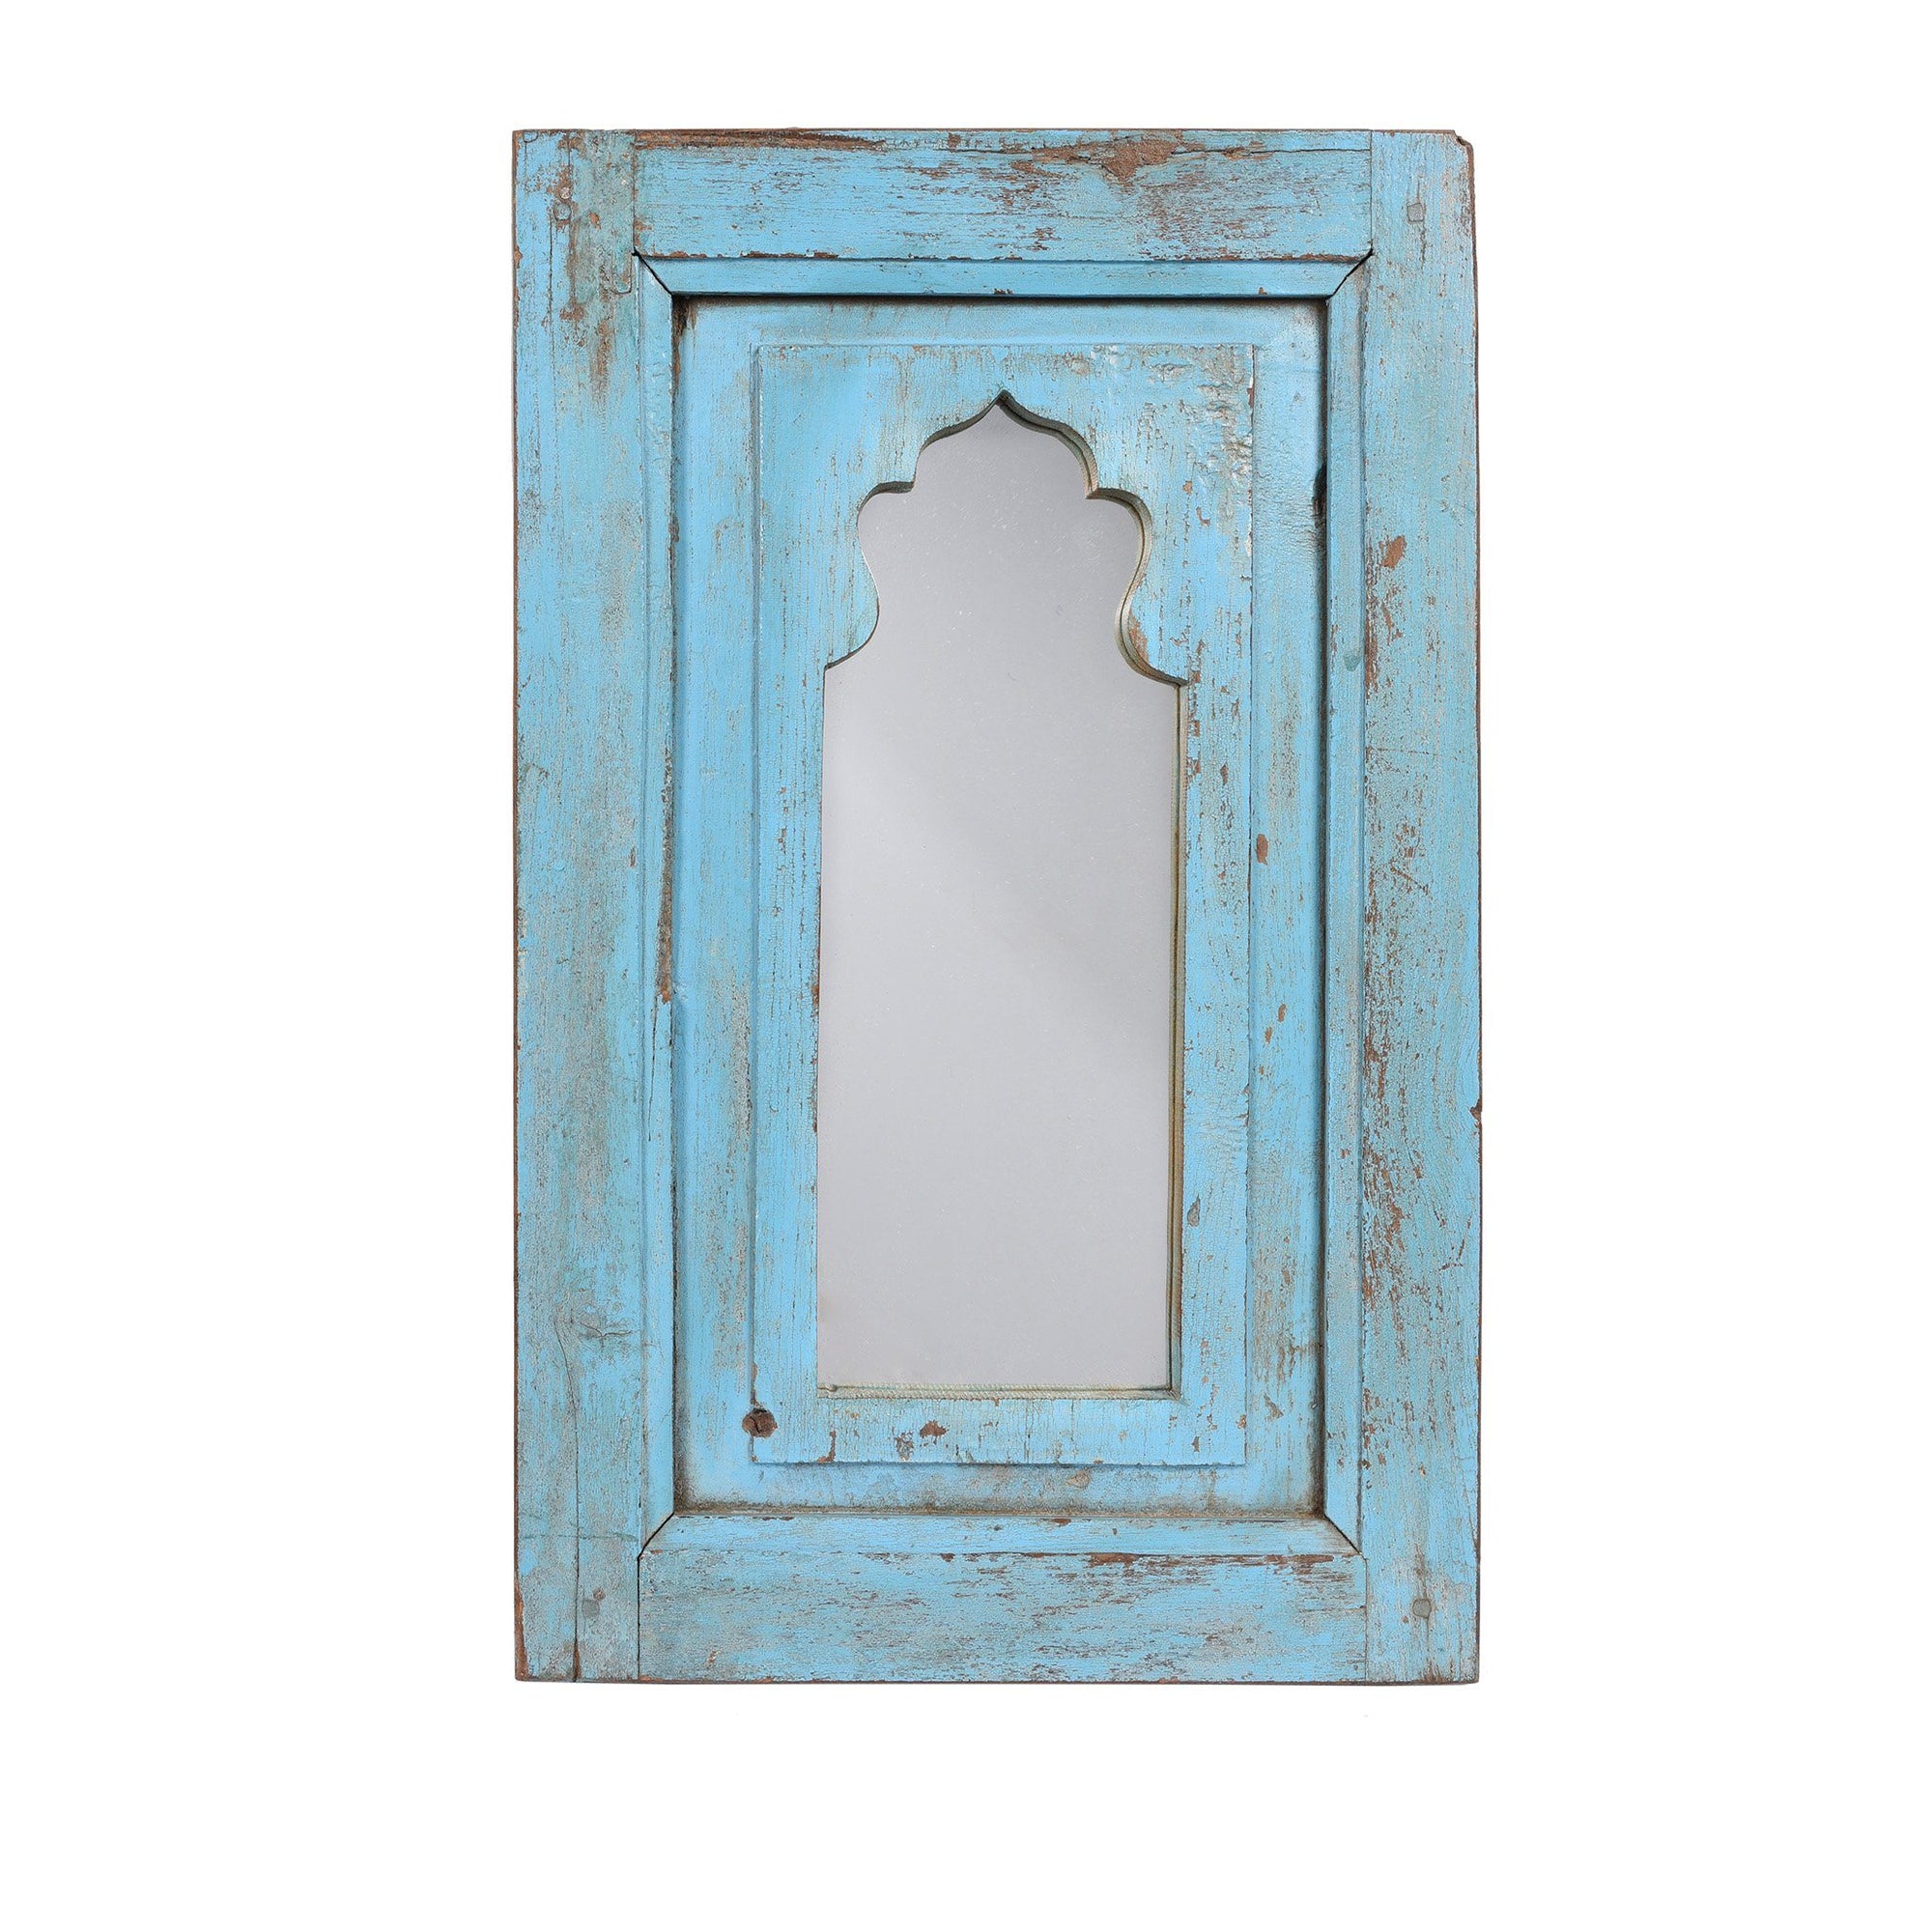 Small Vintage Blue Indian Mihrab Mirror Made From Old Teak Wood | Indigo Antiques